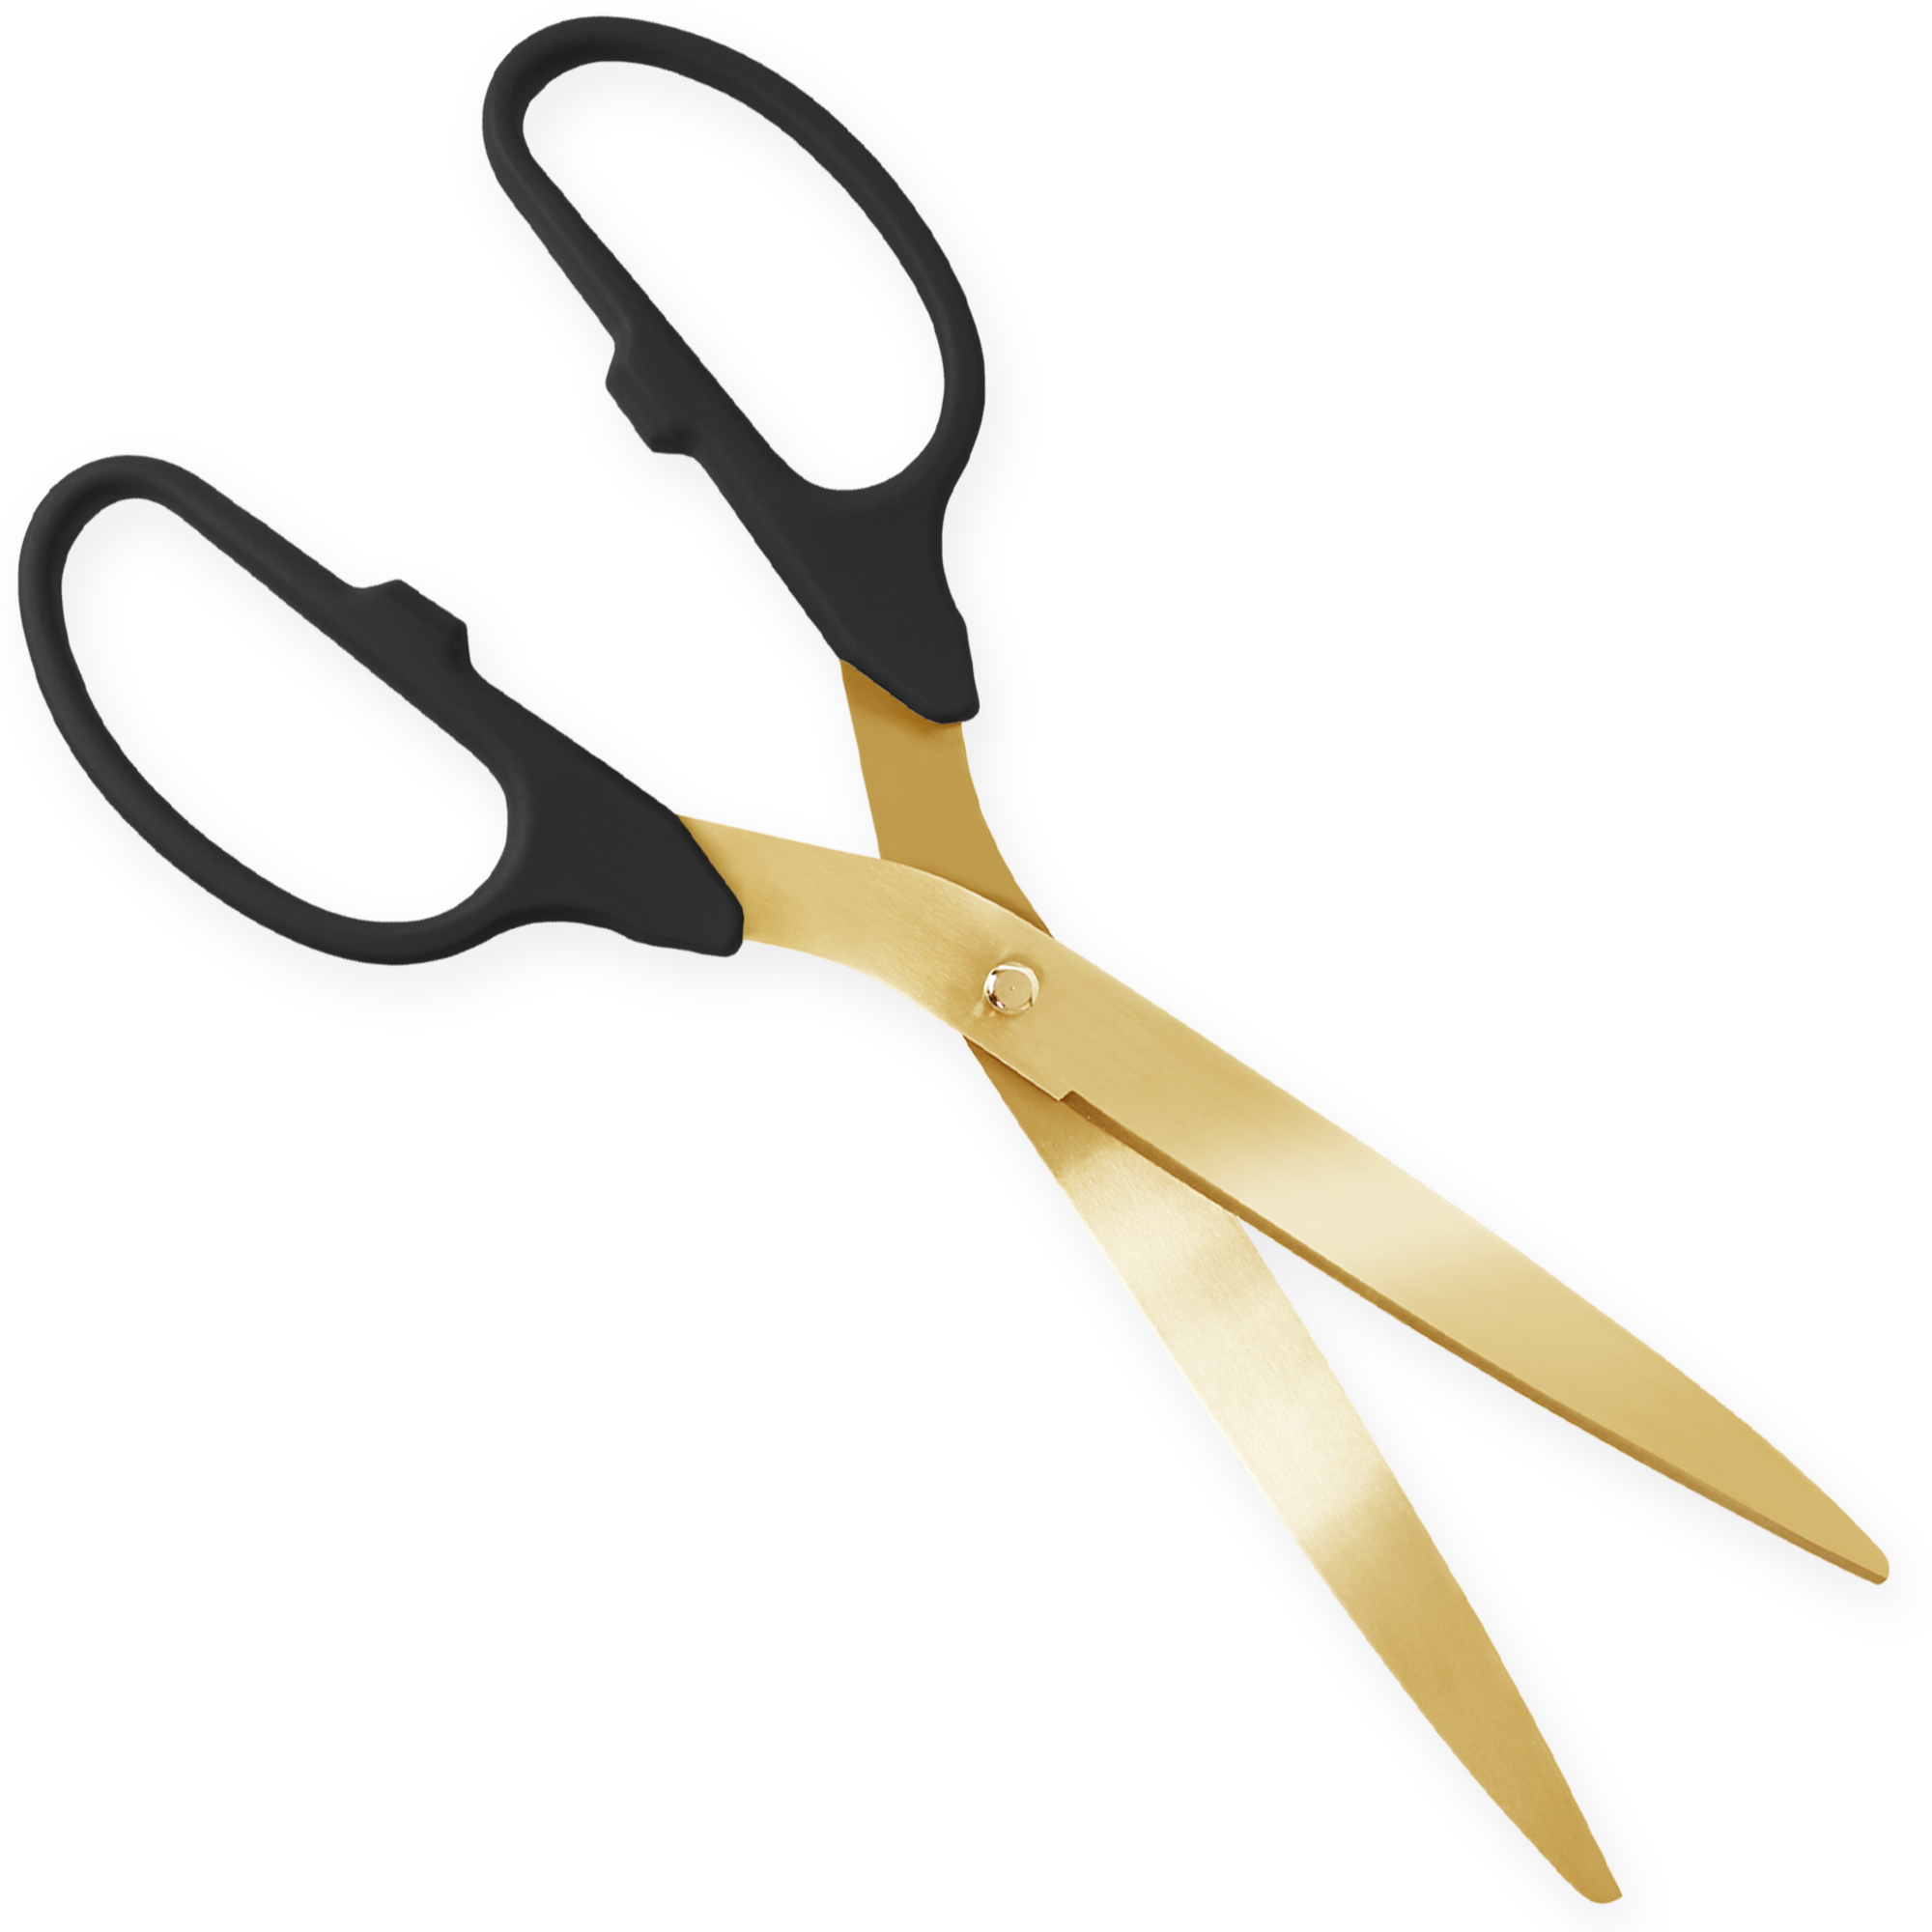  25 Ceremony Ribbon Cutting Scissors by Allures & Illusions :  Arts, Crafts & Sewing